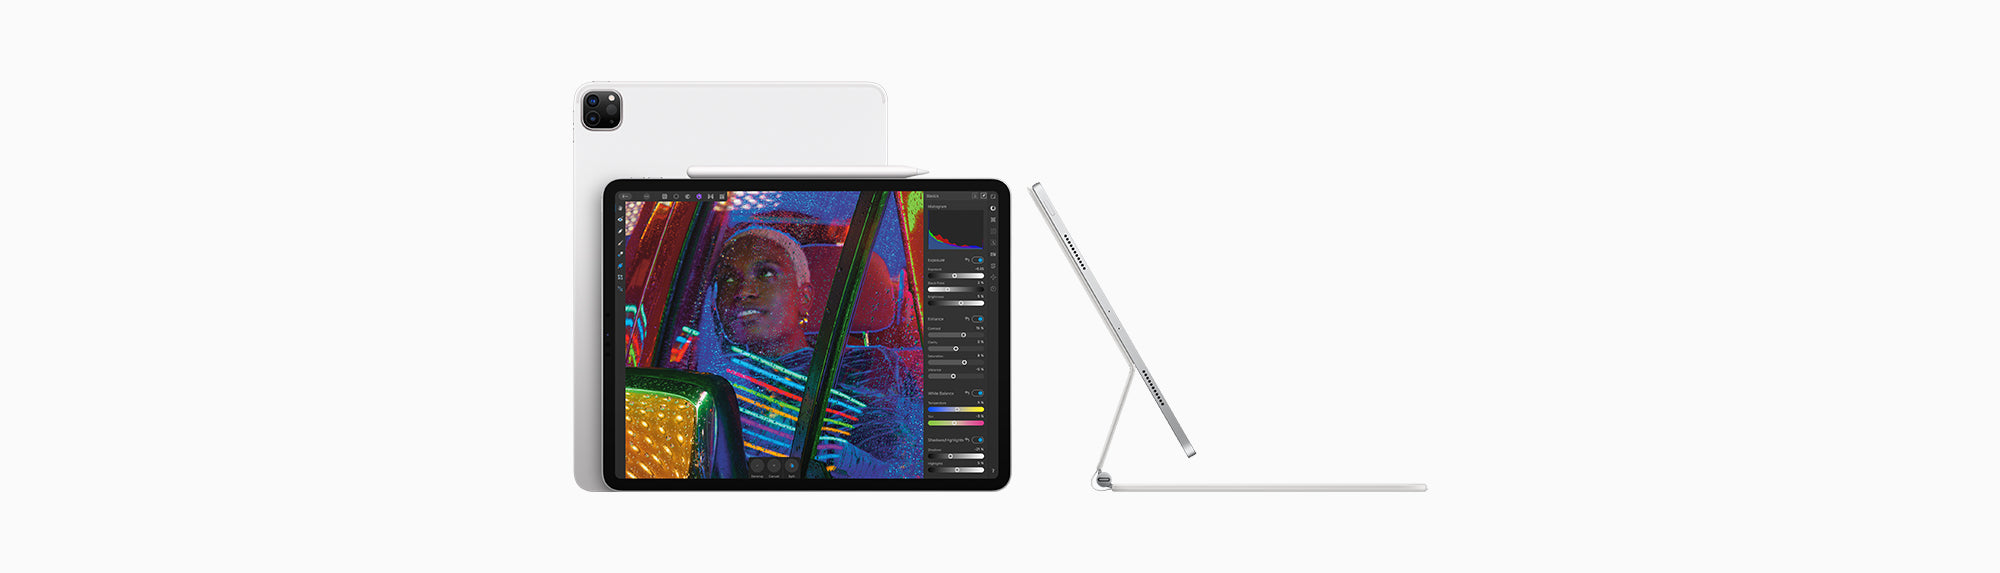 Updates About the Apple iPad Pro 2 in the Philippines